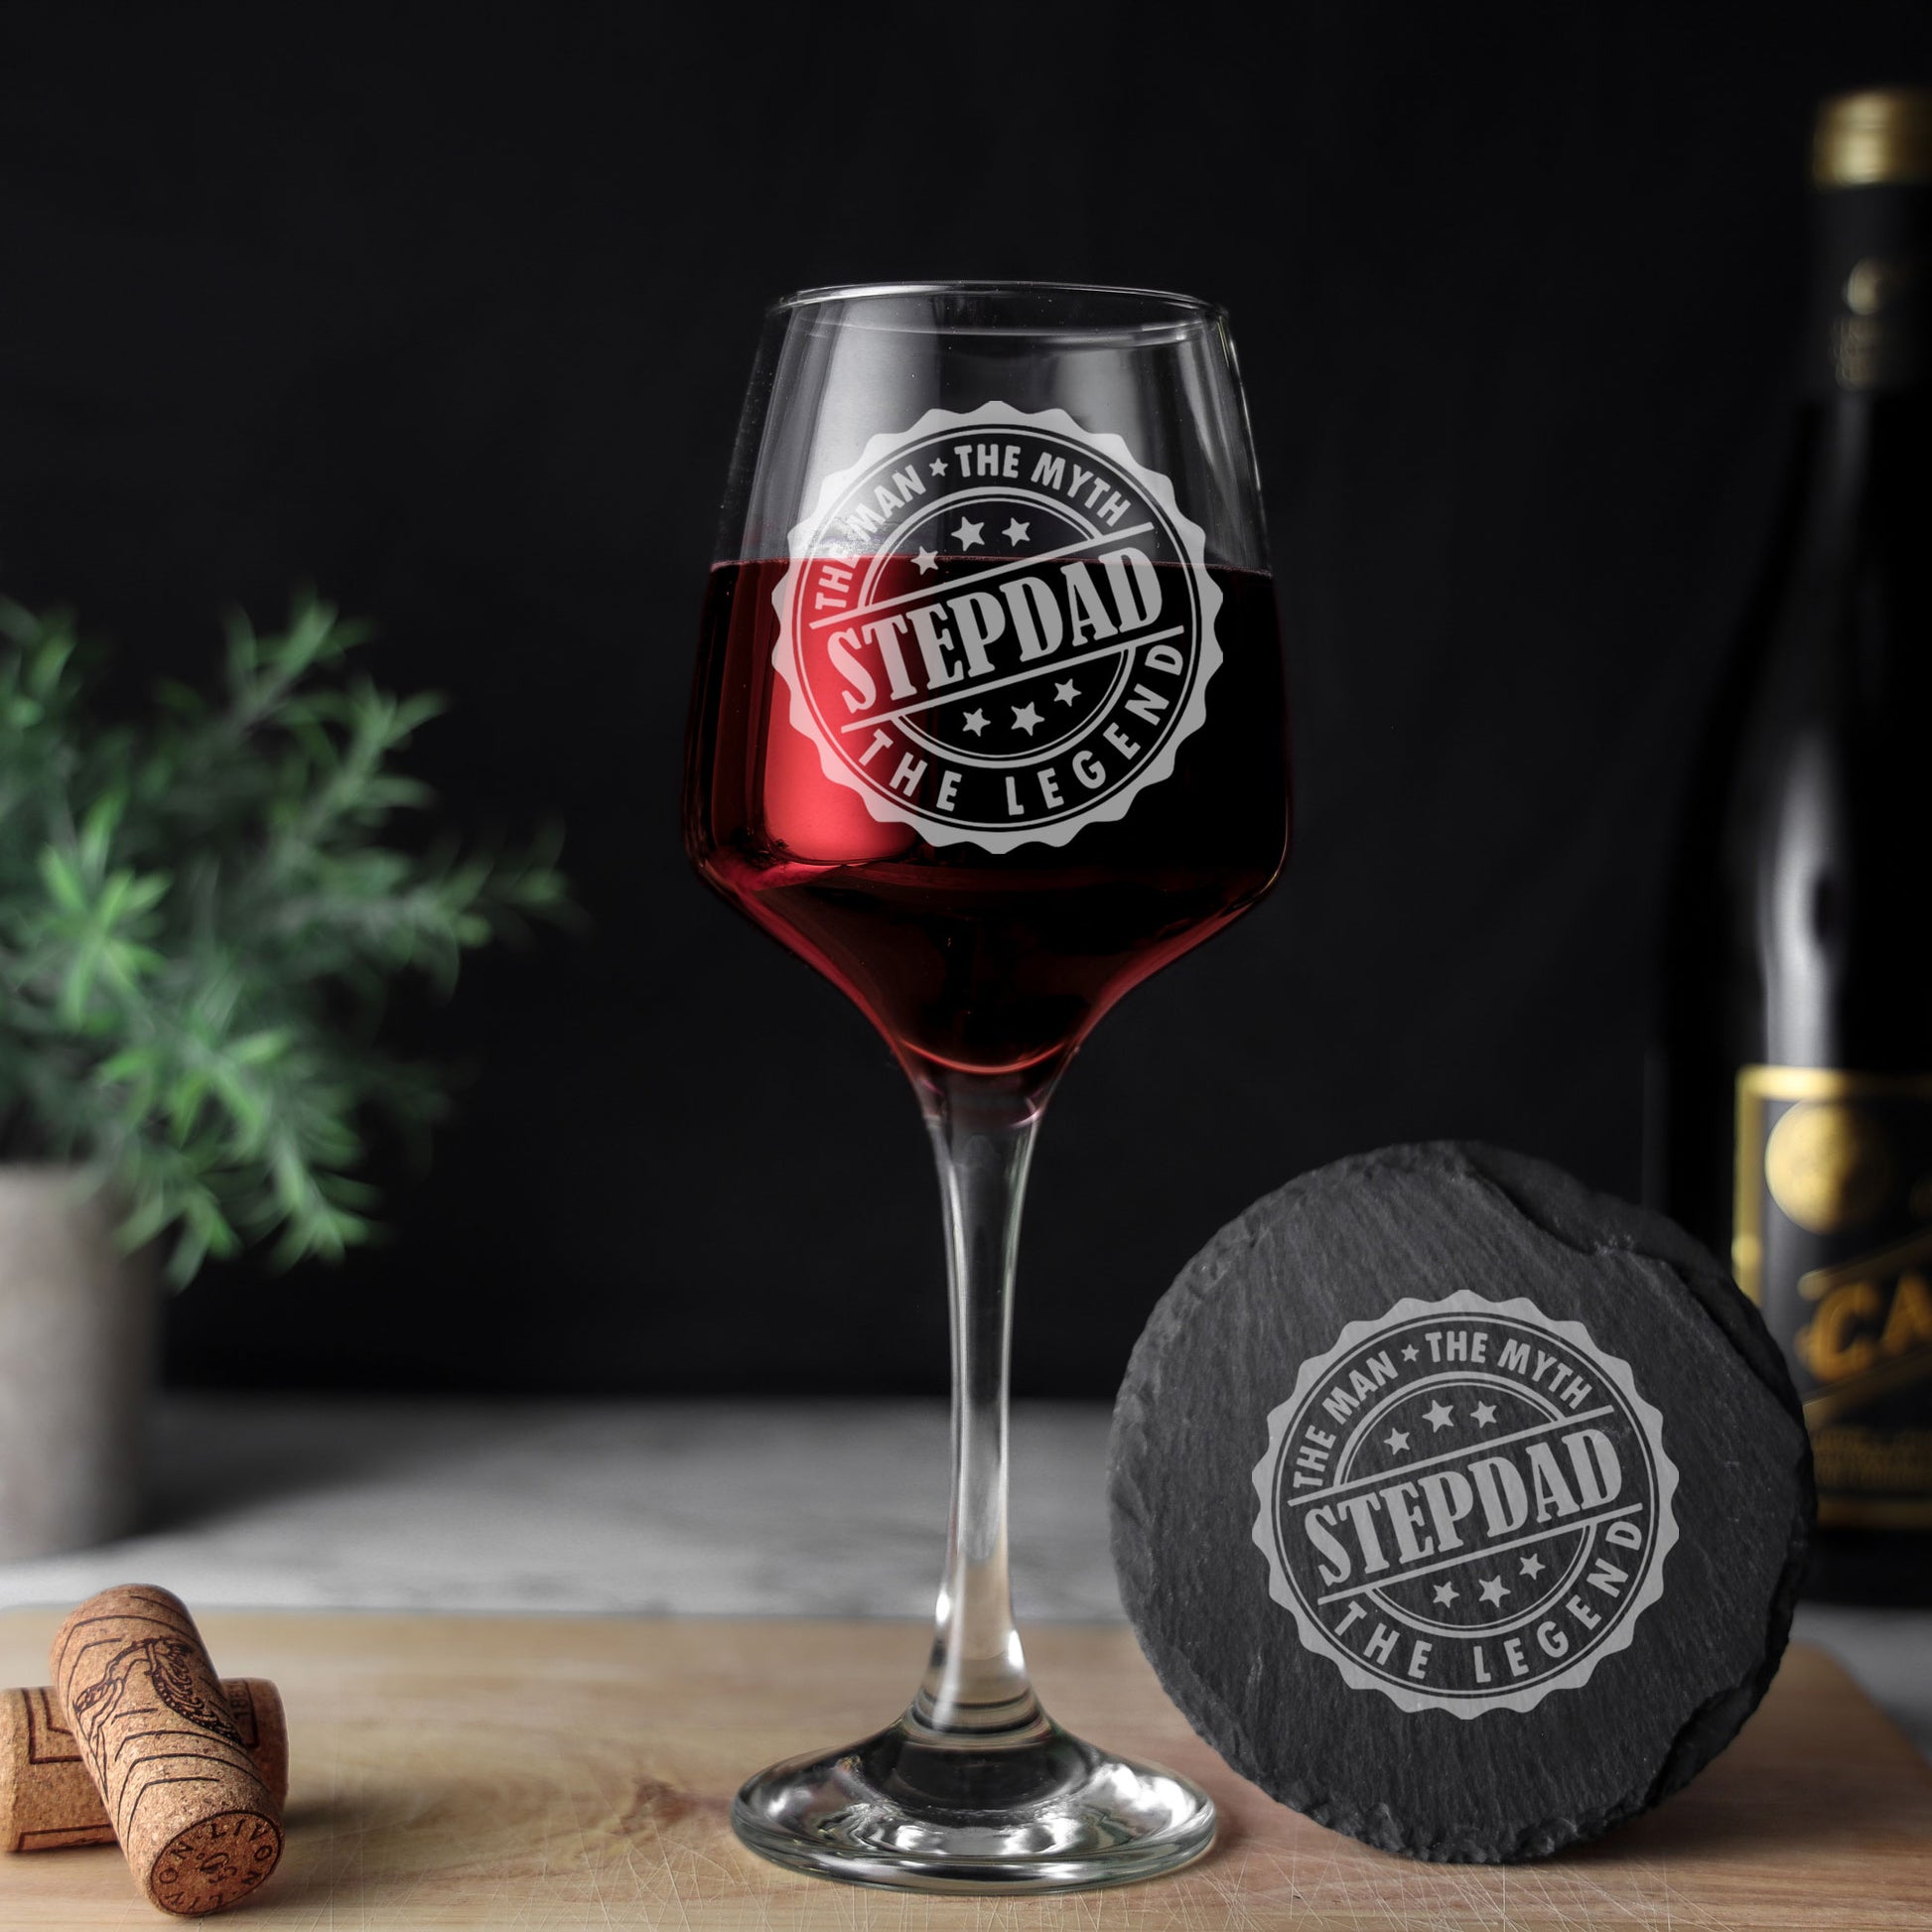 Step Dad The Man The Myth The Legend Engraved Wine Glass and/or Coaster Set  - Always Looking Good - Glass & Round Coaster Set  